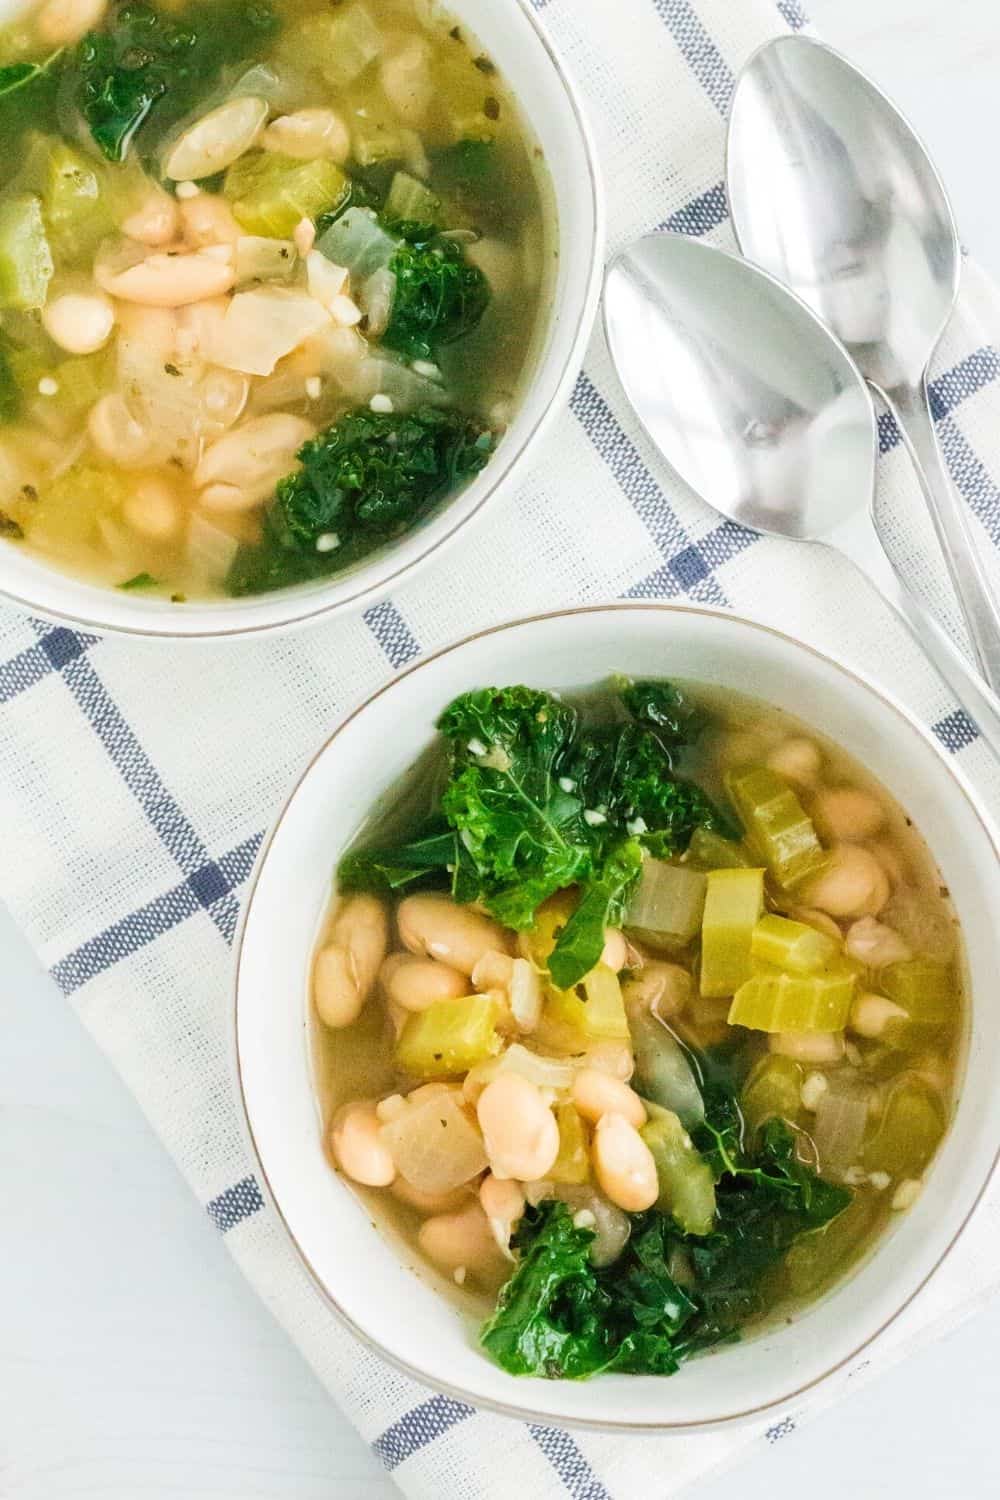 Instant Pot white bean and kale soup served in two white bowls, resting on a blue and white napkin with two spoons nearby.